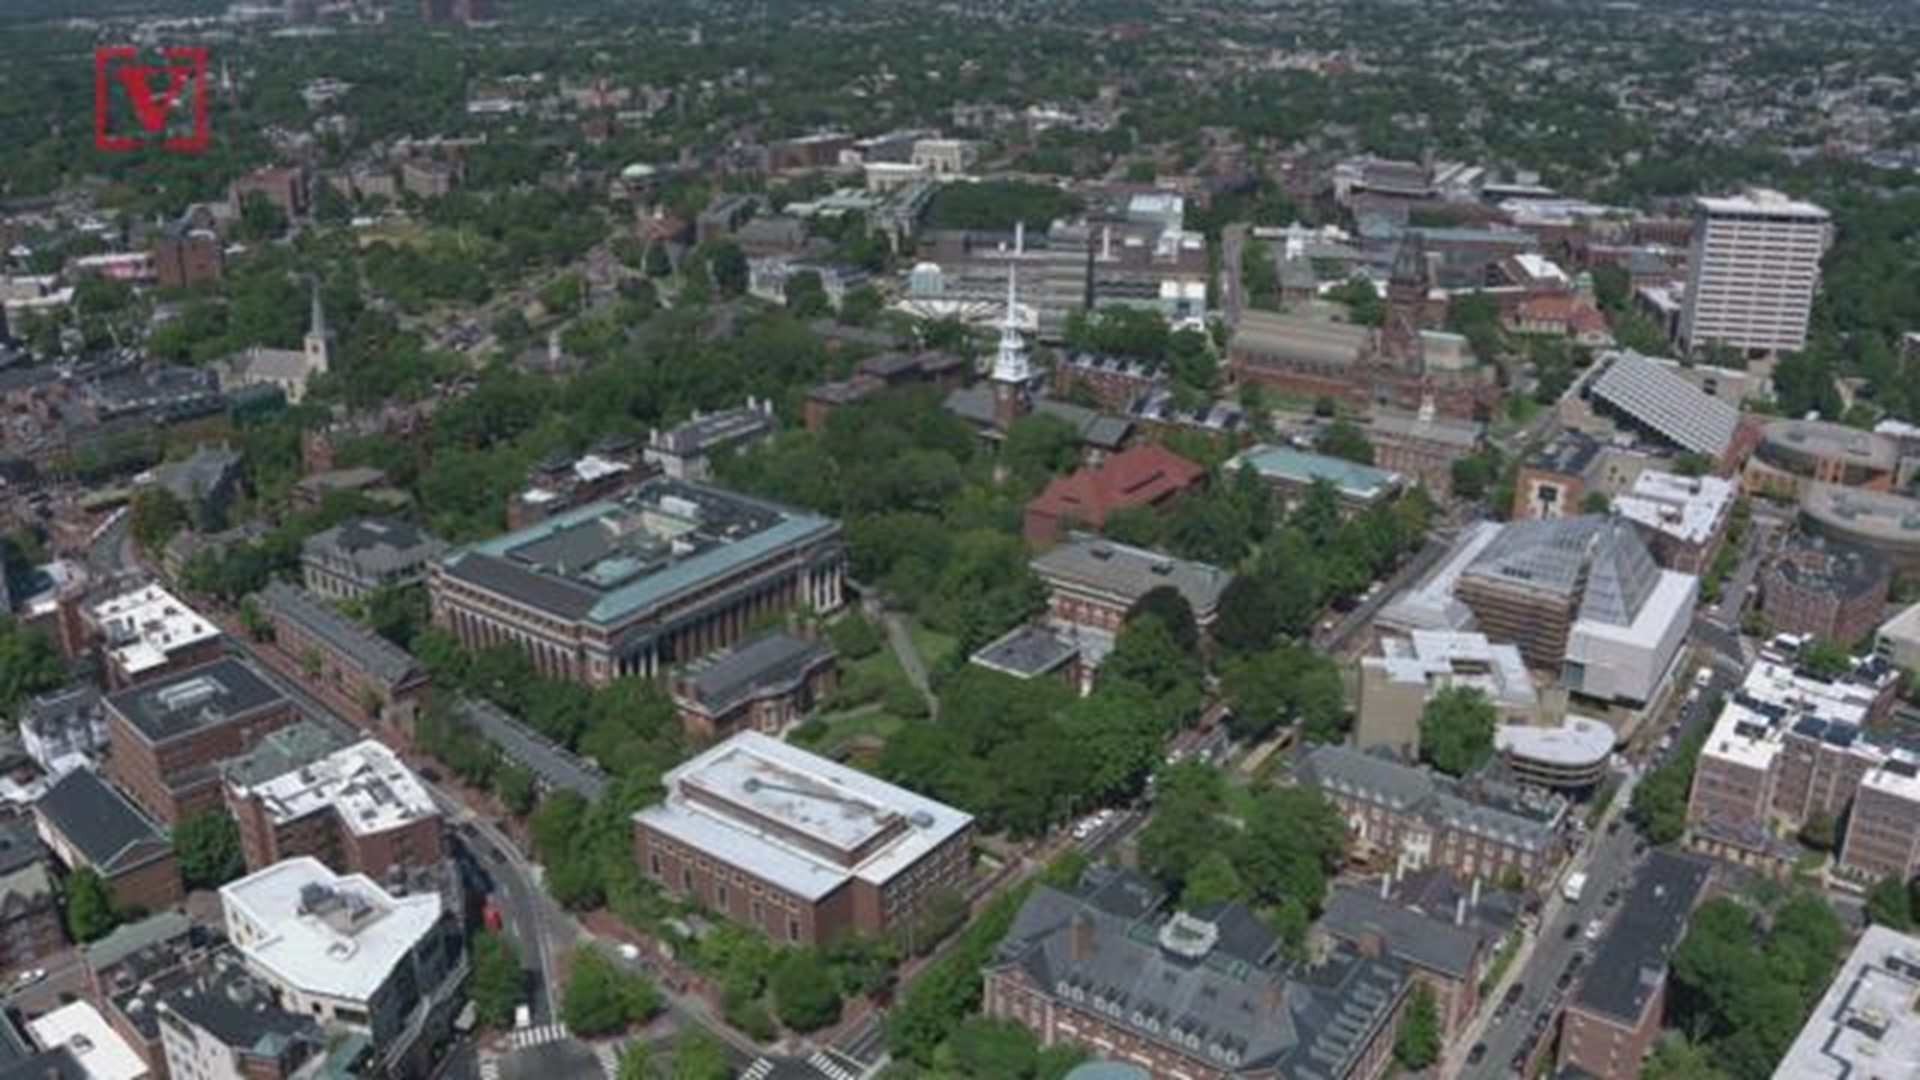 Removal of 100-Year Old Tree Upsets Harvard Students 